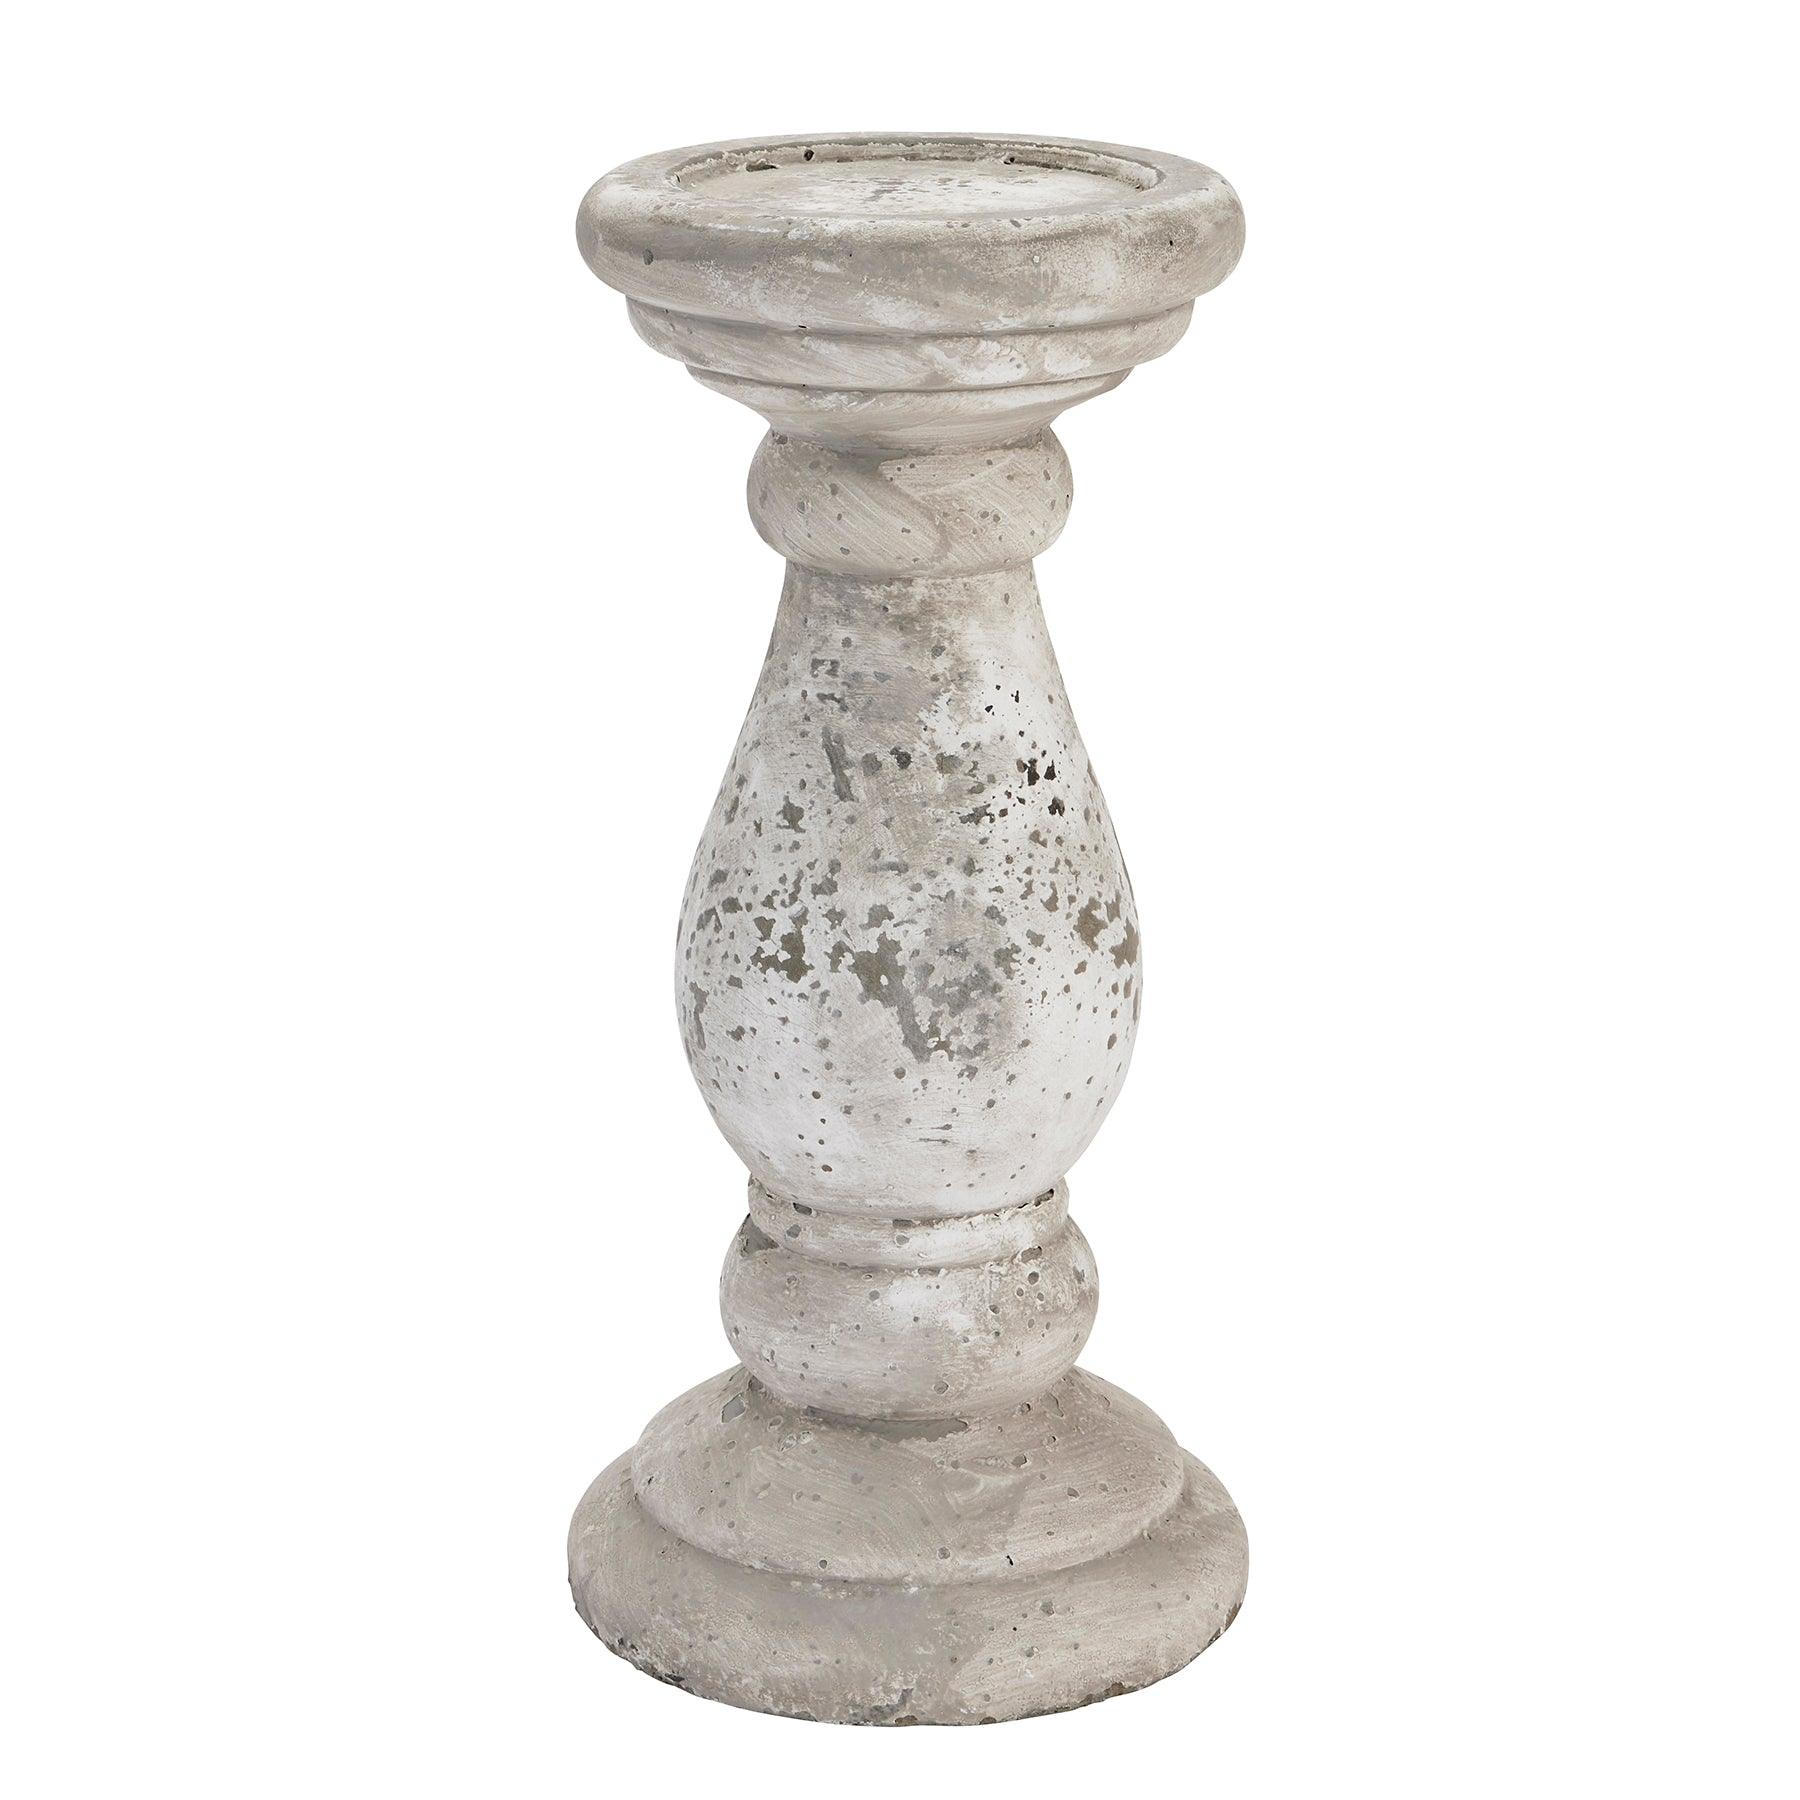 View Large Stone Ceramic Candle Holder information